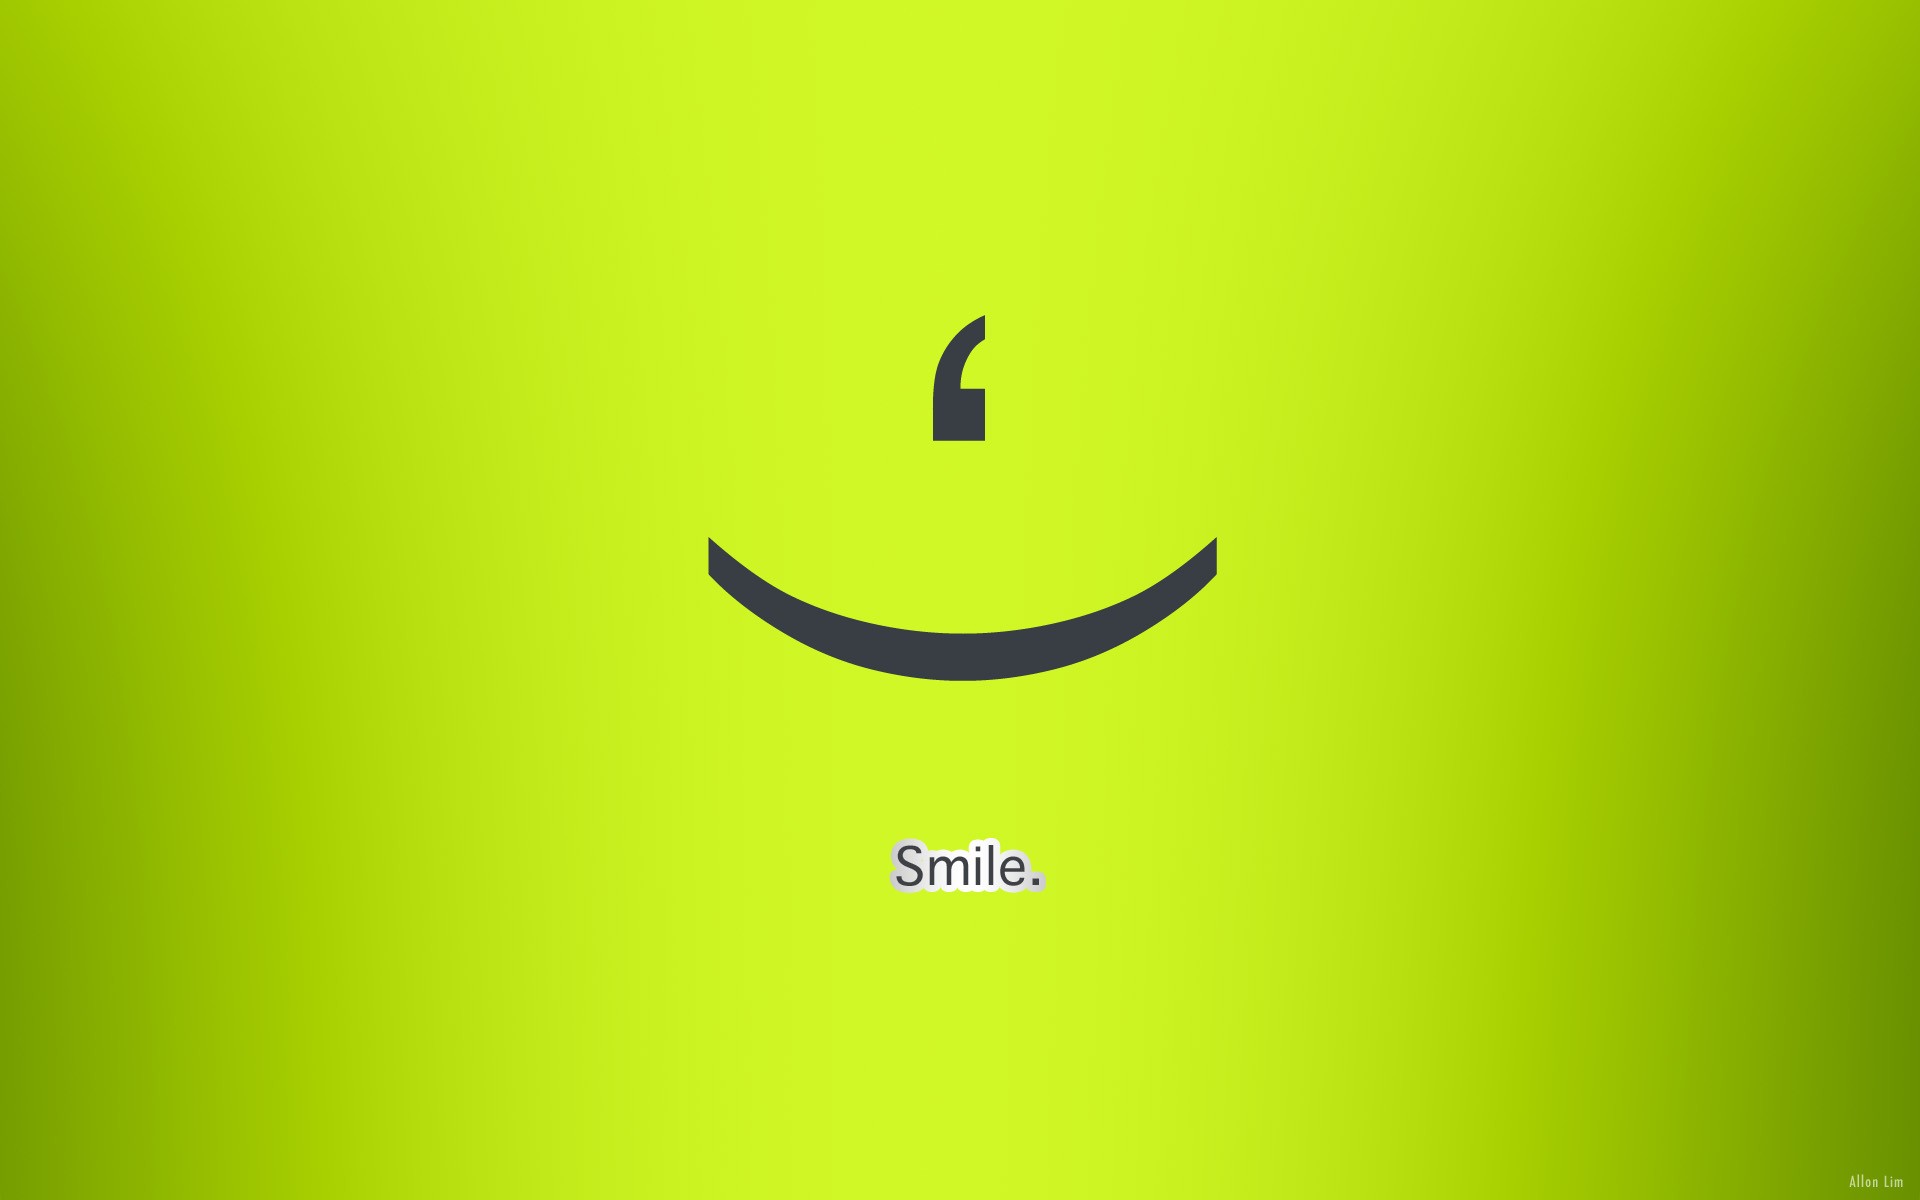 green, Text, Smiling, Simple, Background, Green, Background Wallpaper